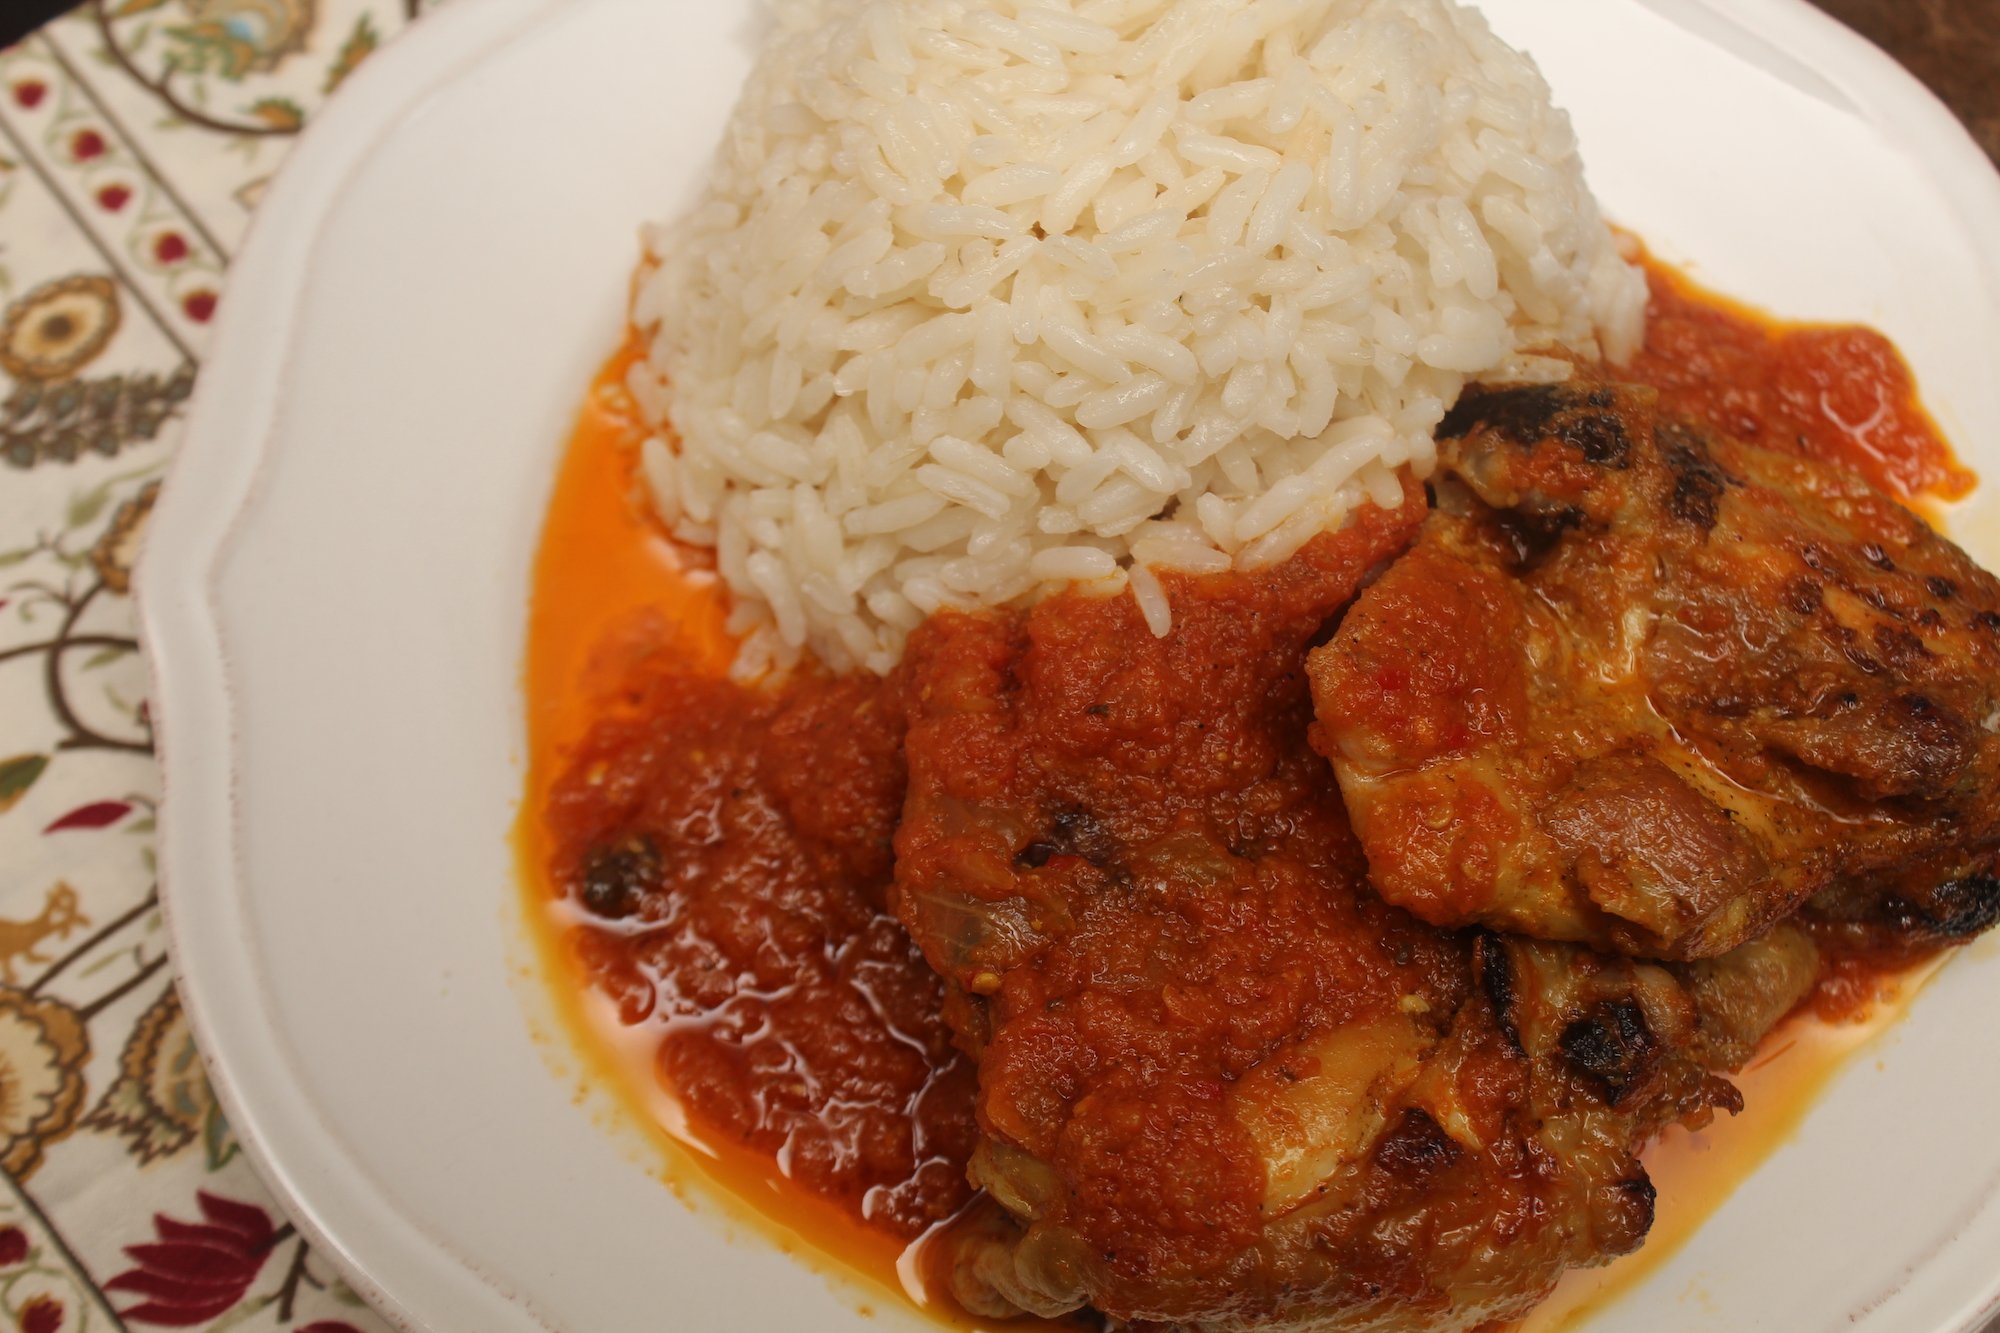 Rice and stew